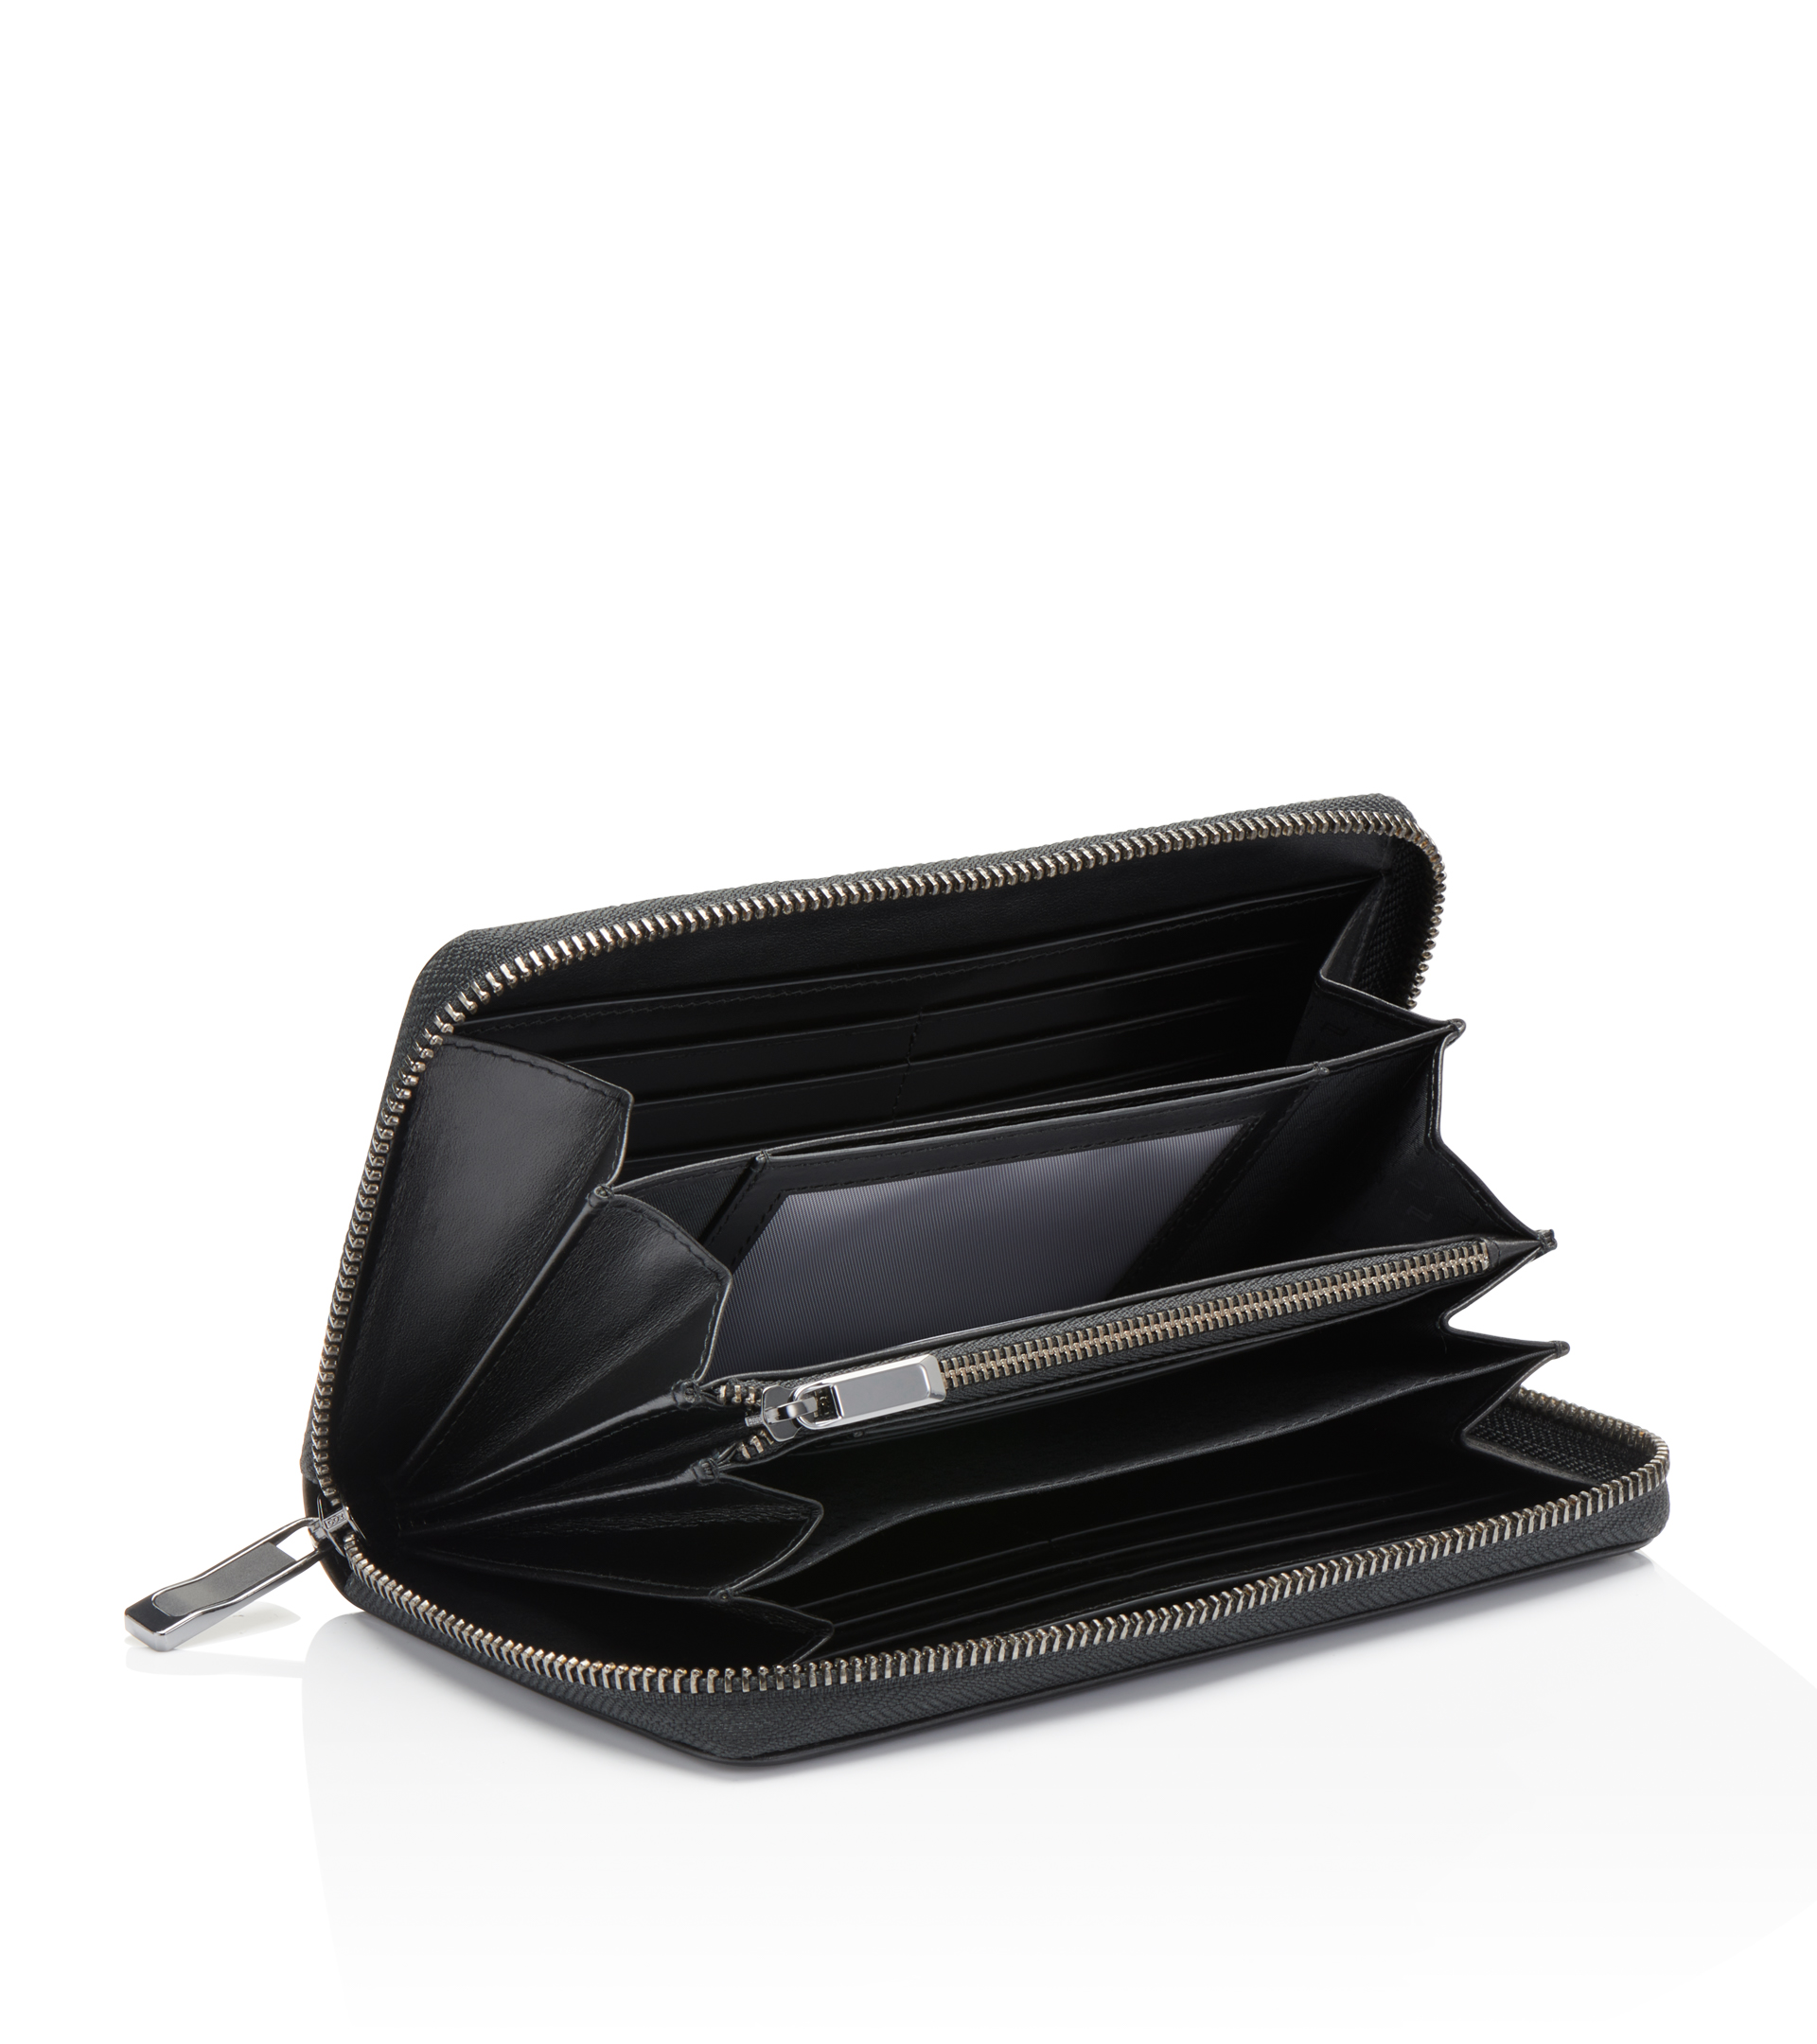 Discovering The Luxury World of SLG'S - Small Leather Goods